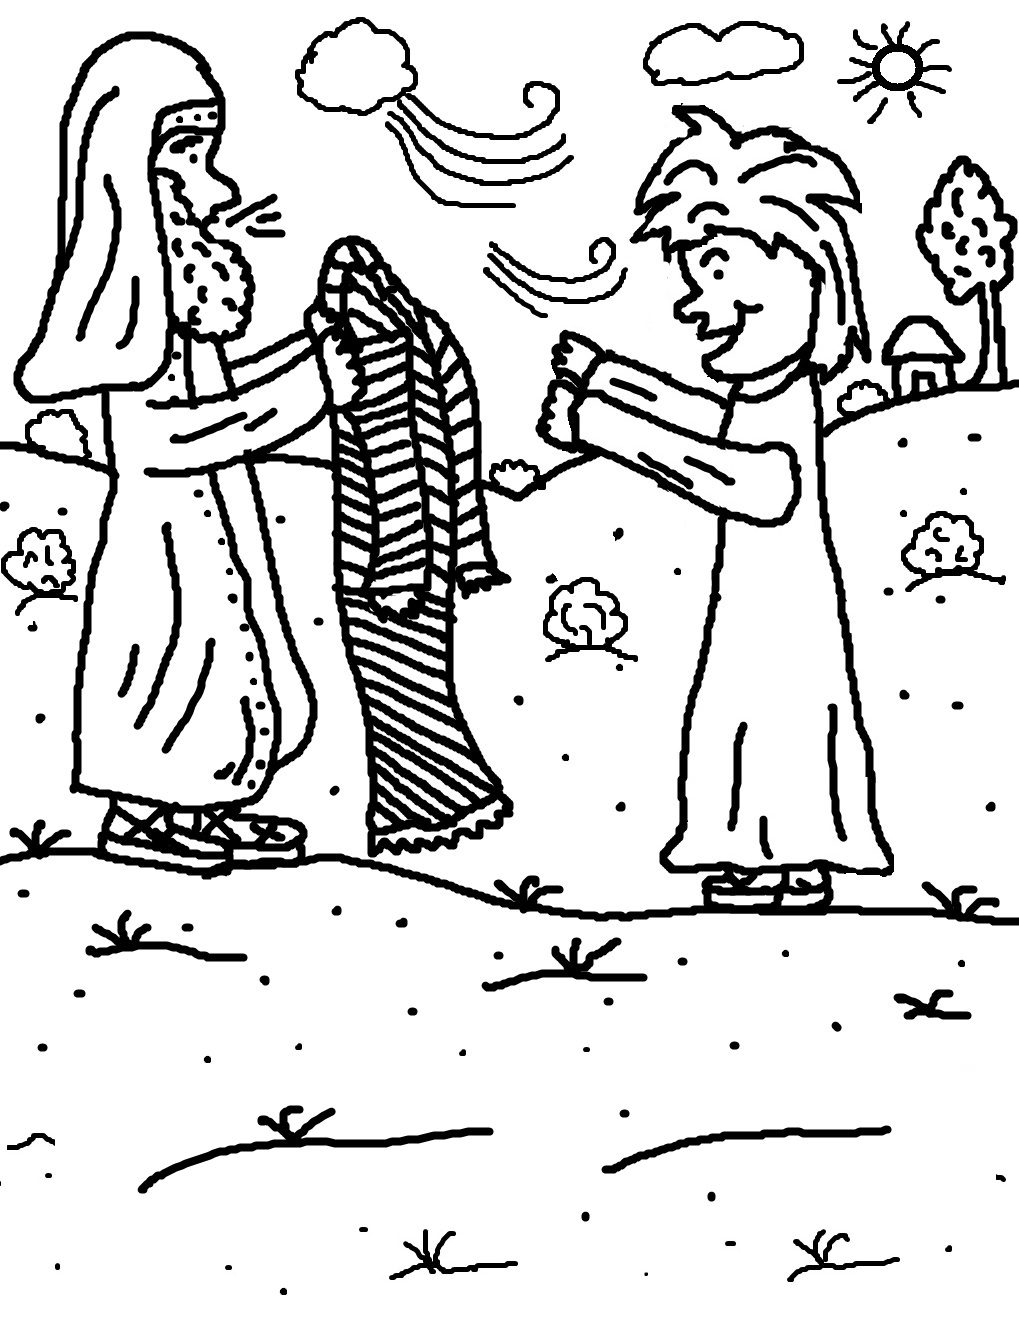 Download Luxury Free Bible Coloring Pages Joseph and His Brothers ...